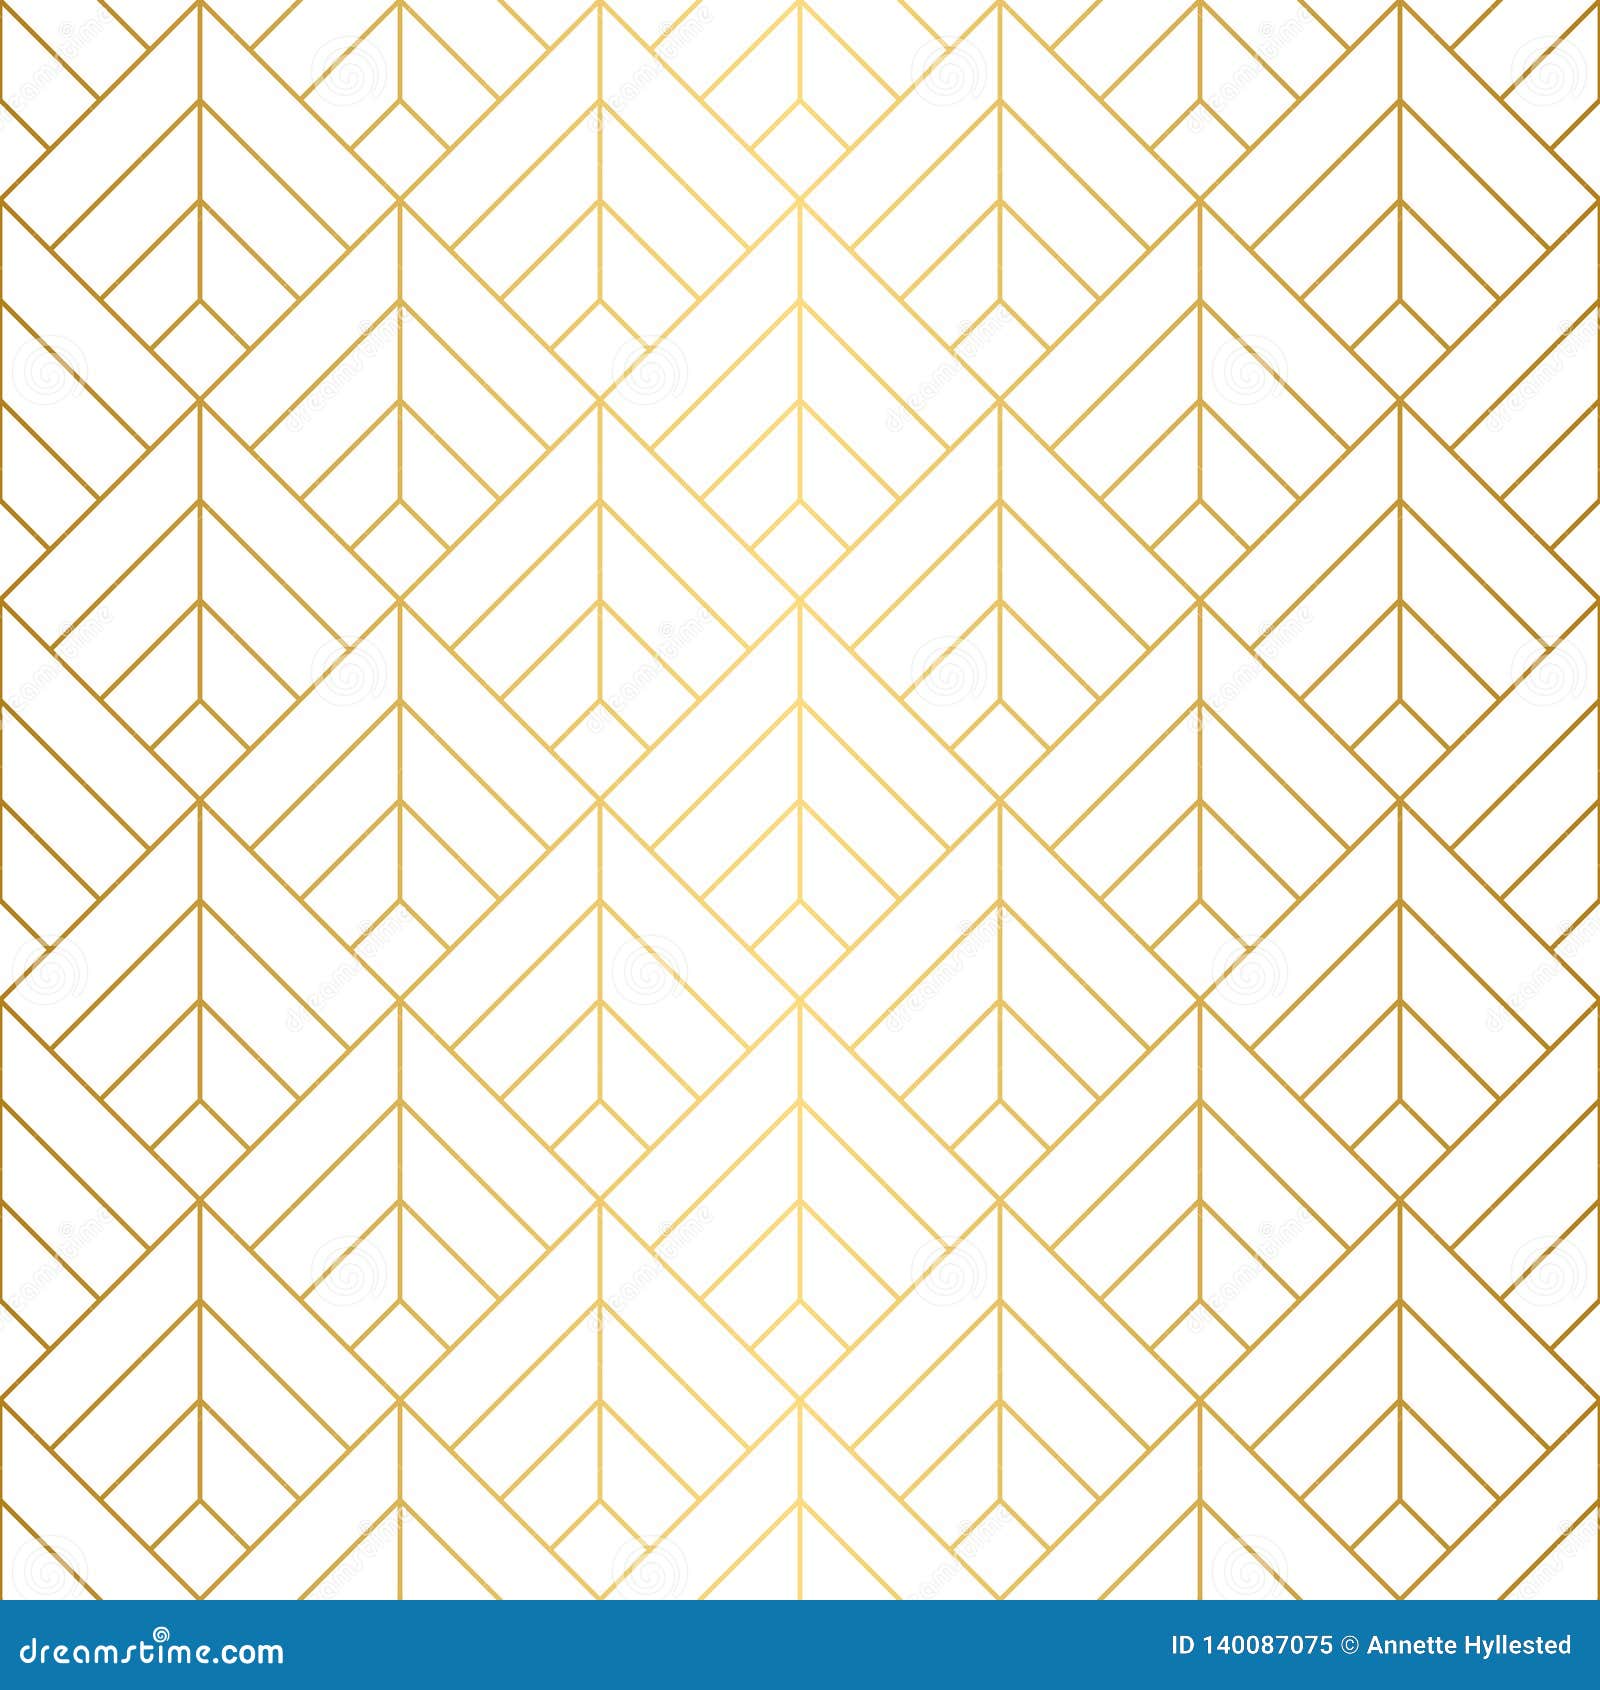 geometric squares seamless pattern with minimalistic gold lines.